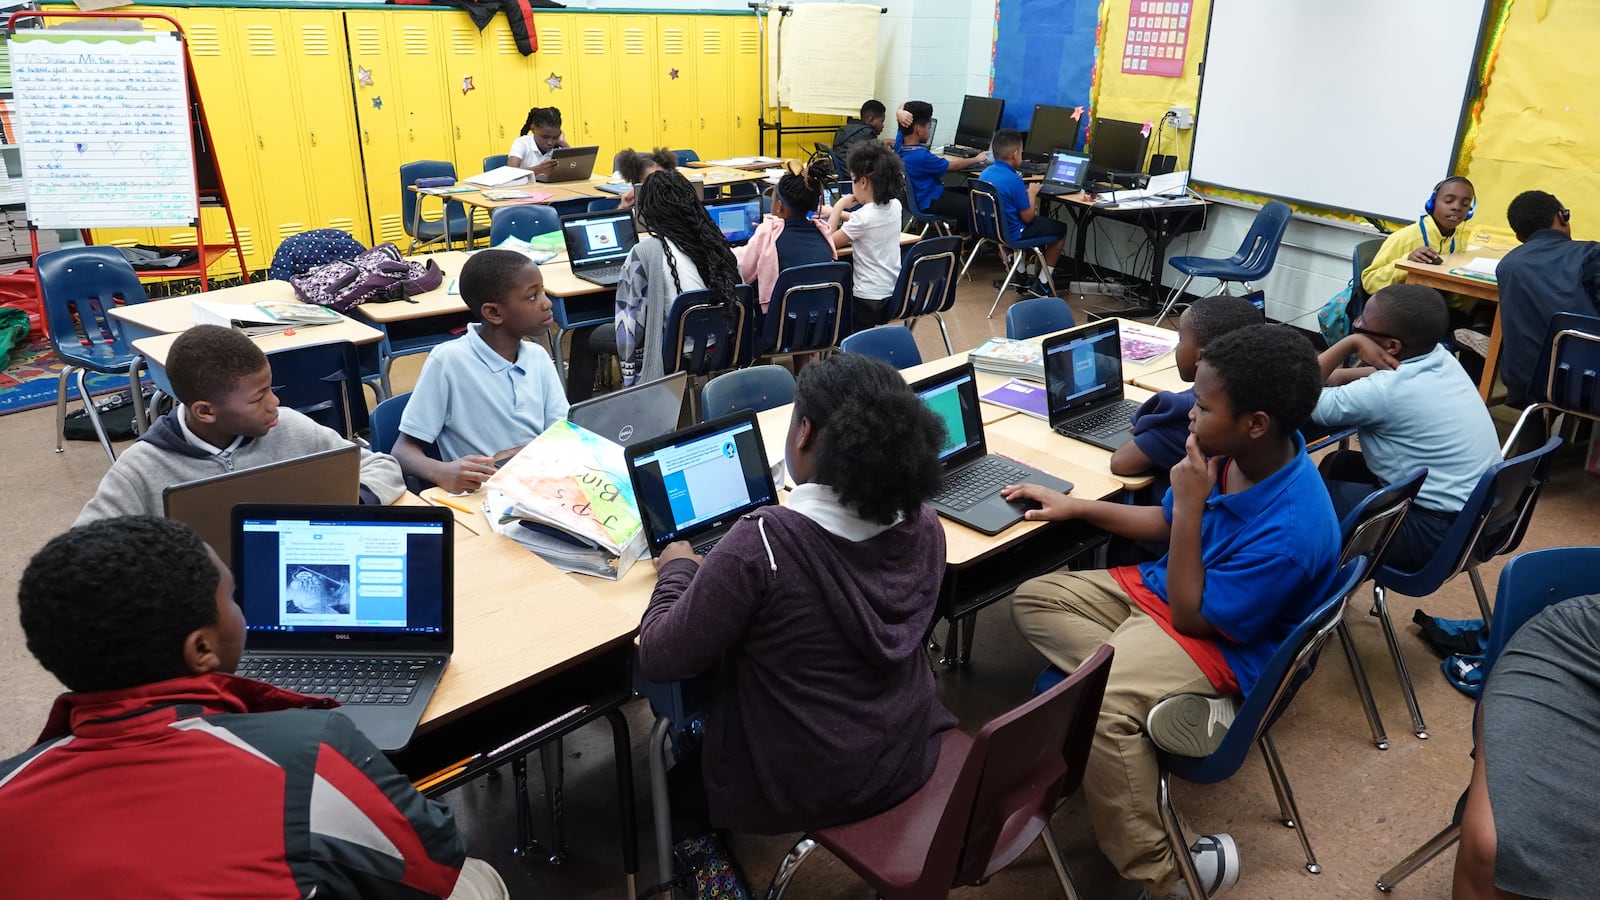 Students work on laptop computers in a classroom at Gardenview Elementary School in Memphis.